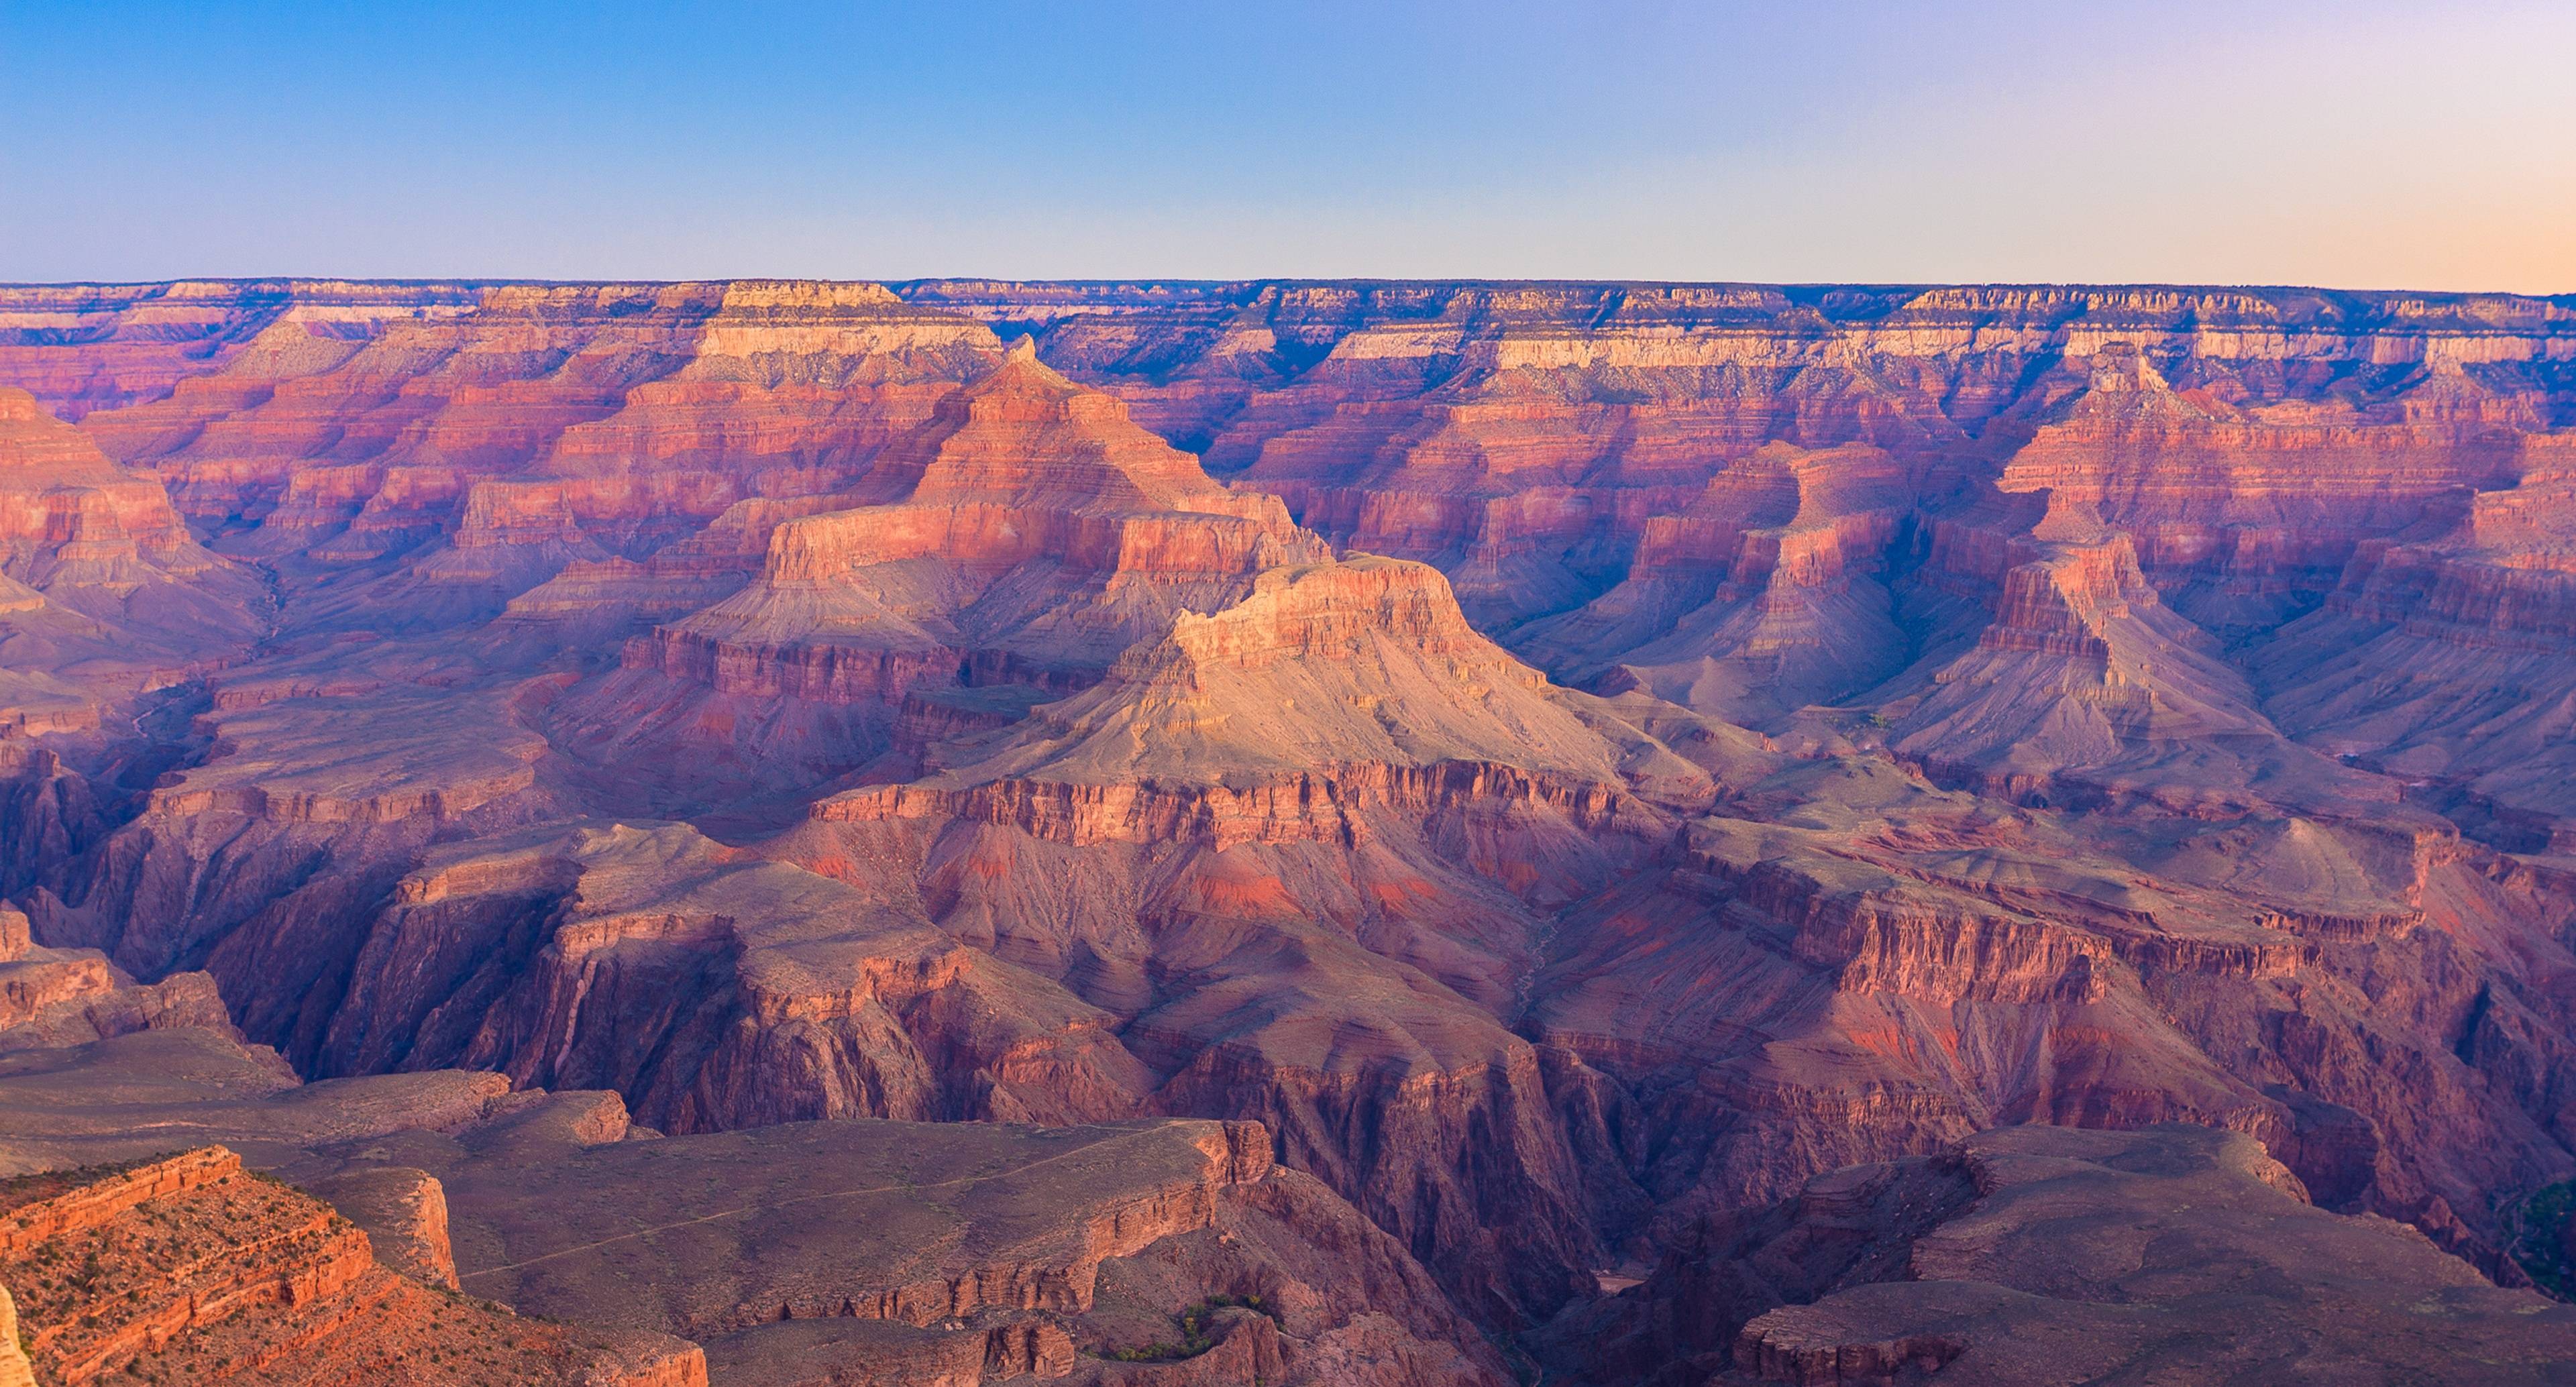 The Grand Canyon: One of the Seven Natural Wonders of the World